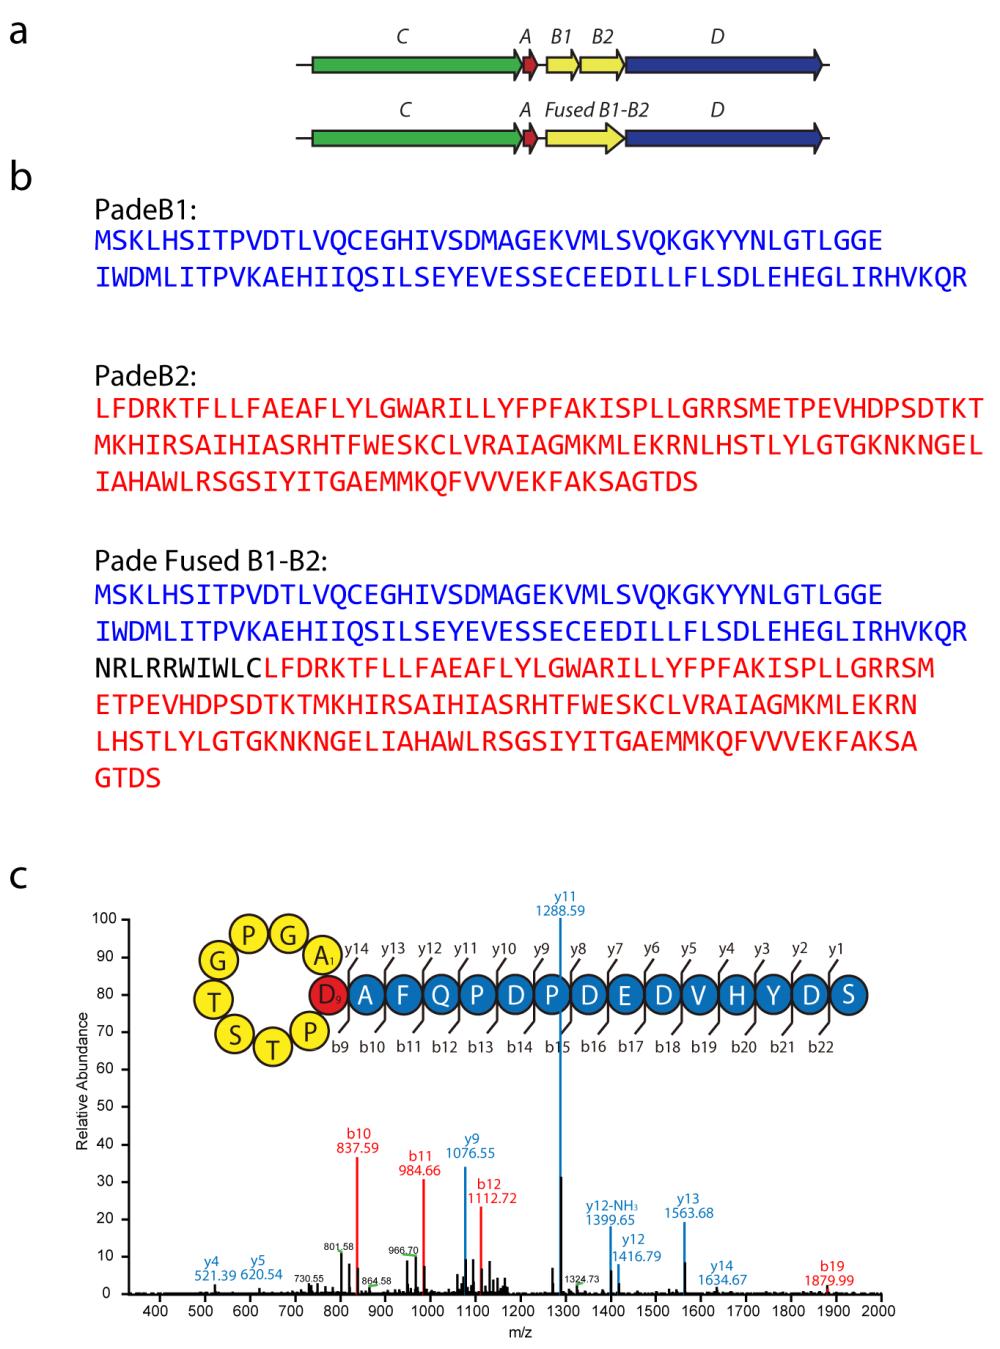 Supplementary Table S5. Primers for Gibson assembly of the cna1 gene into pet-48b(+). Overhang regions are underlined.